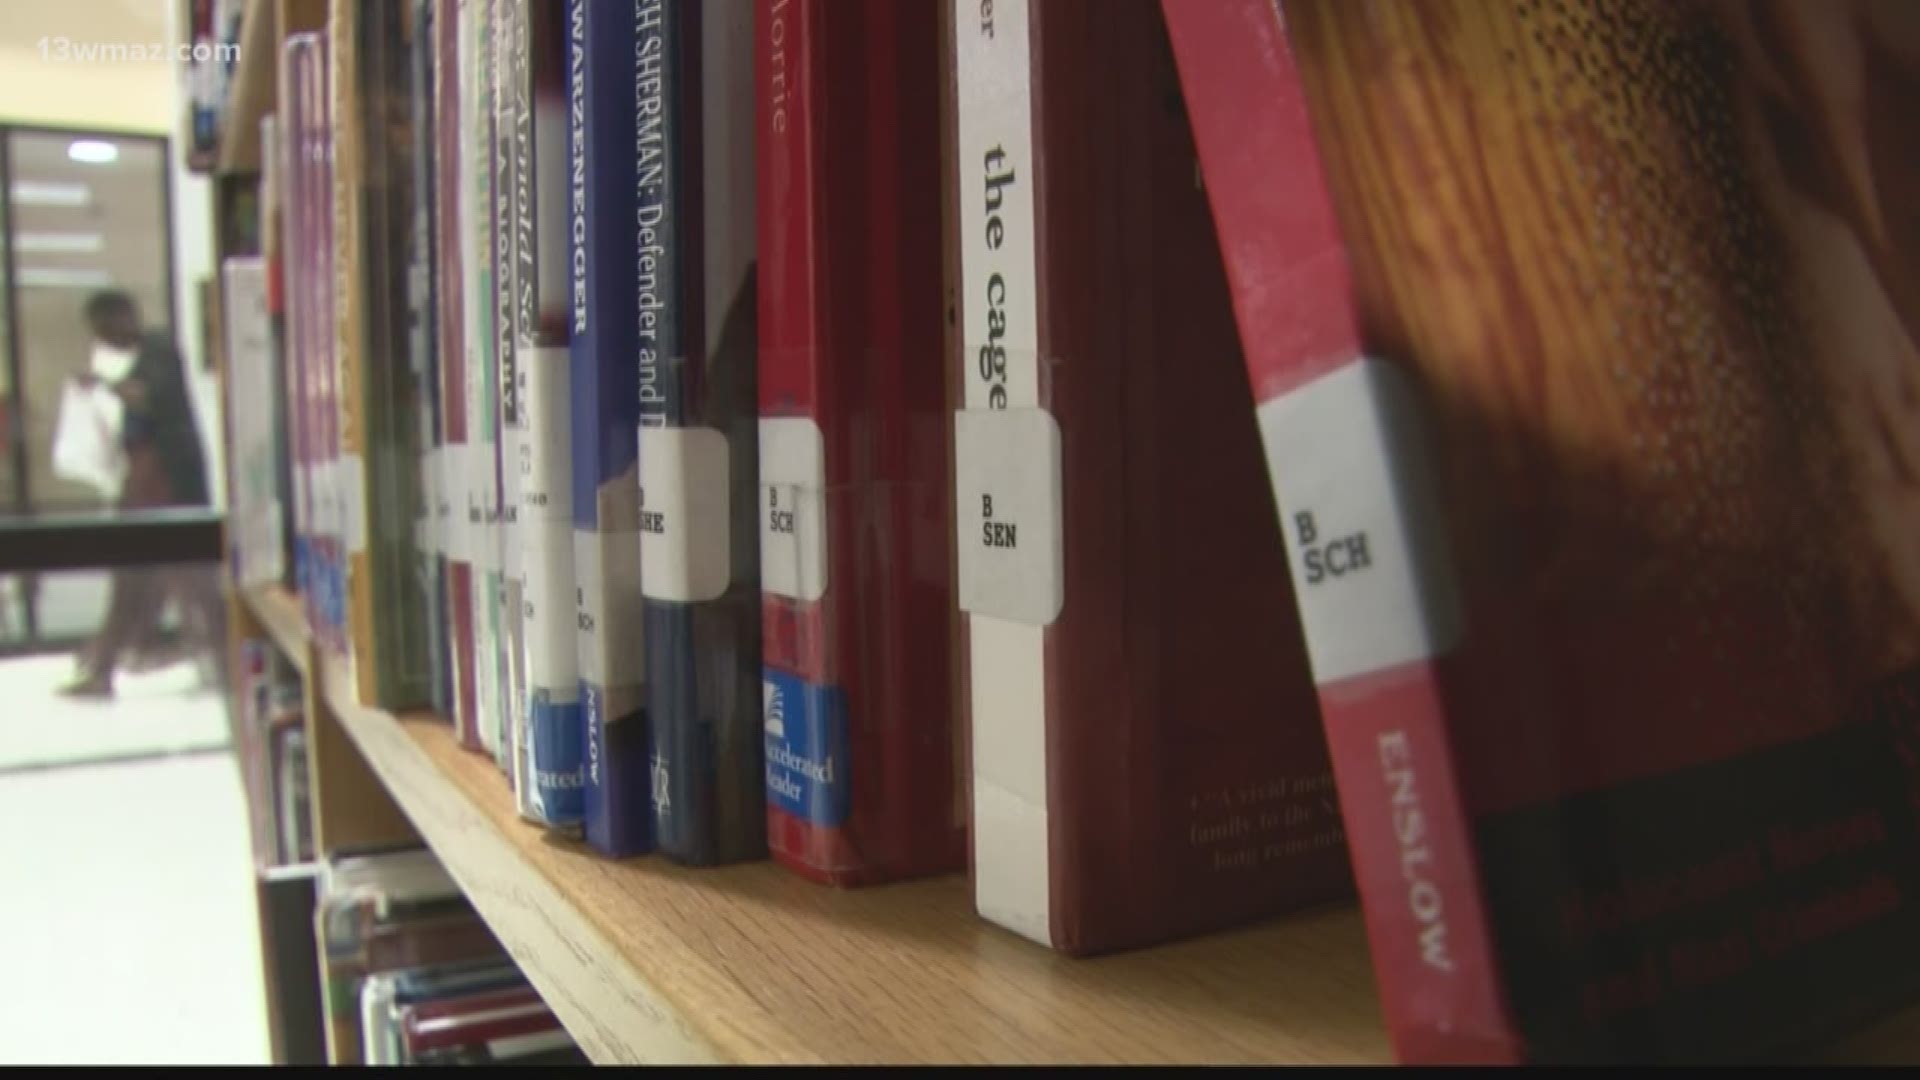 School may be out, but students have to hit the books for their summer reading assignments.